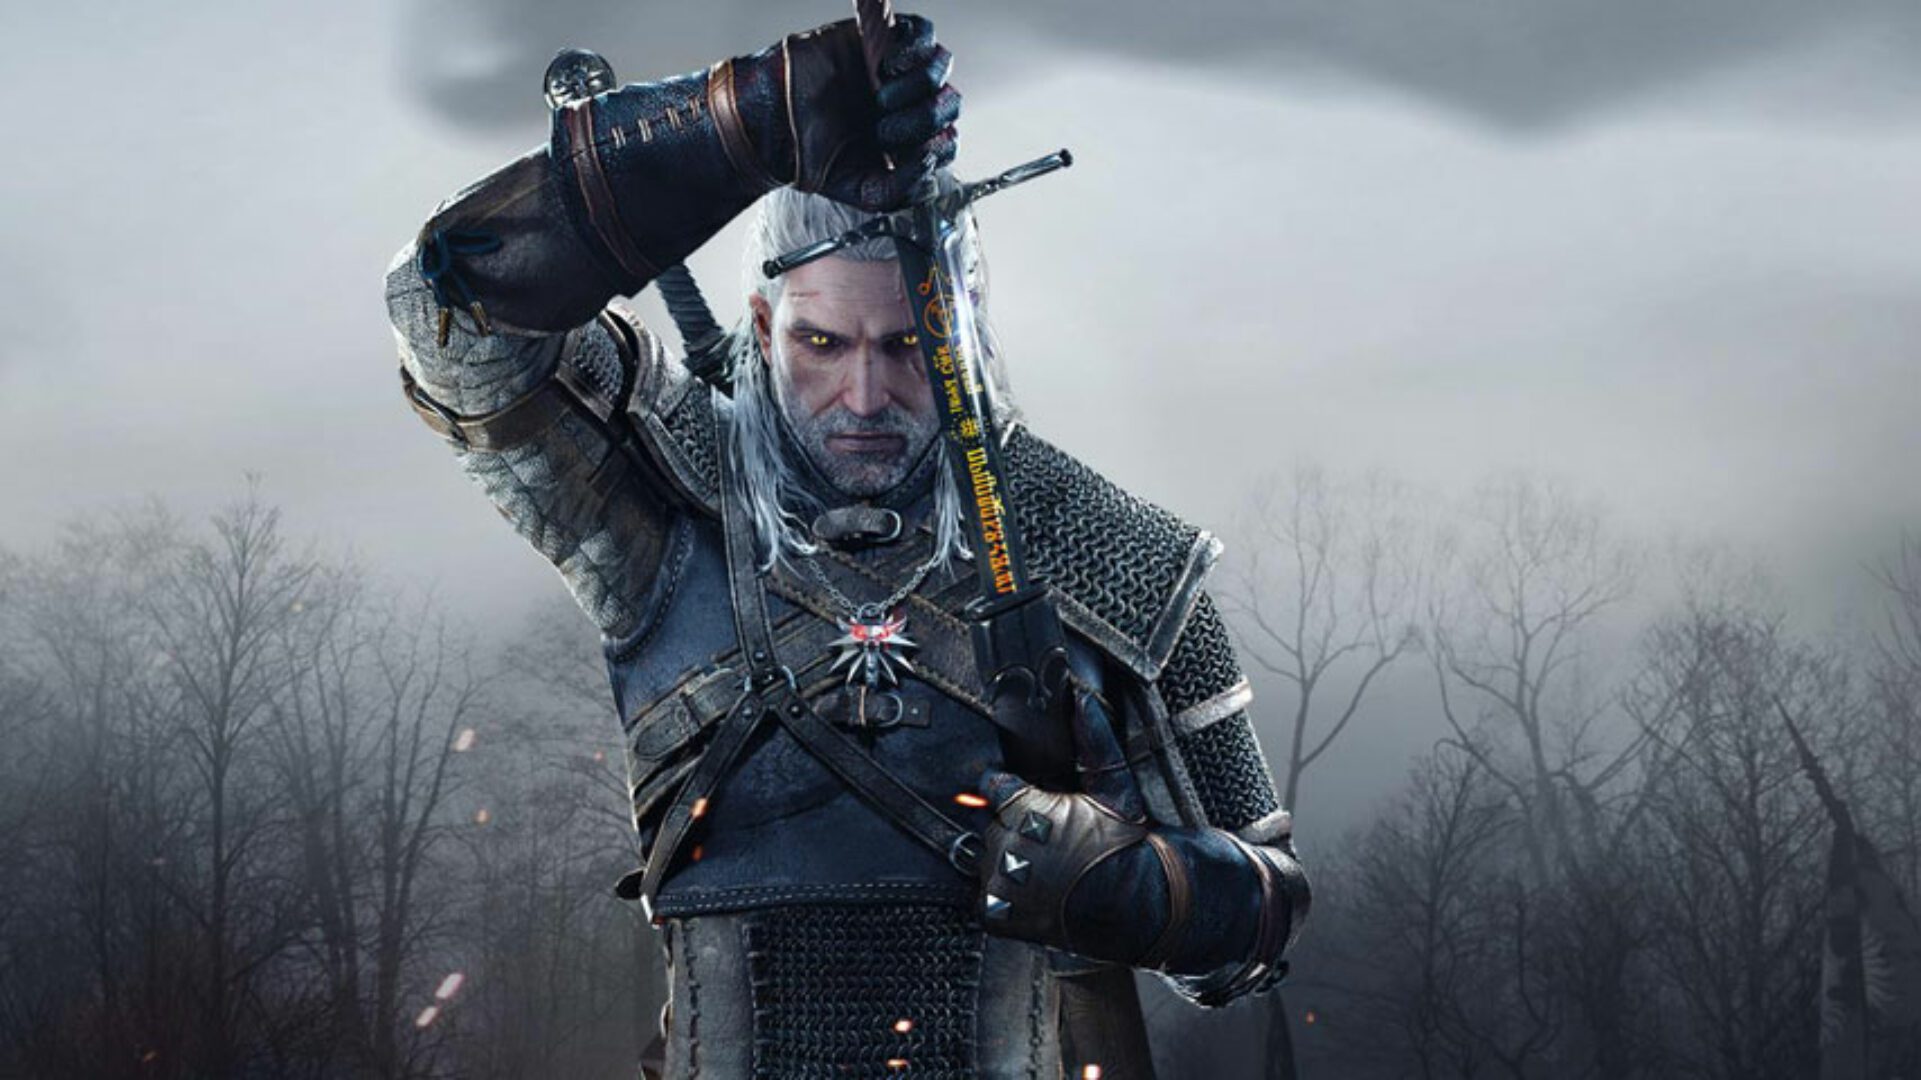 Witcher 3 Game of the Year Edition Announced